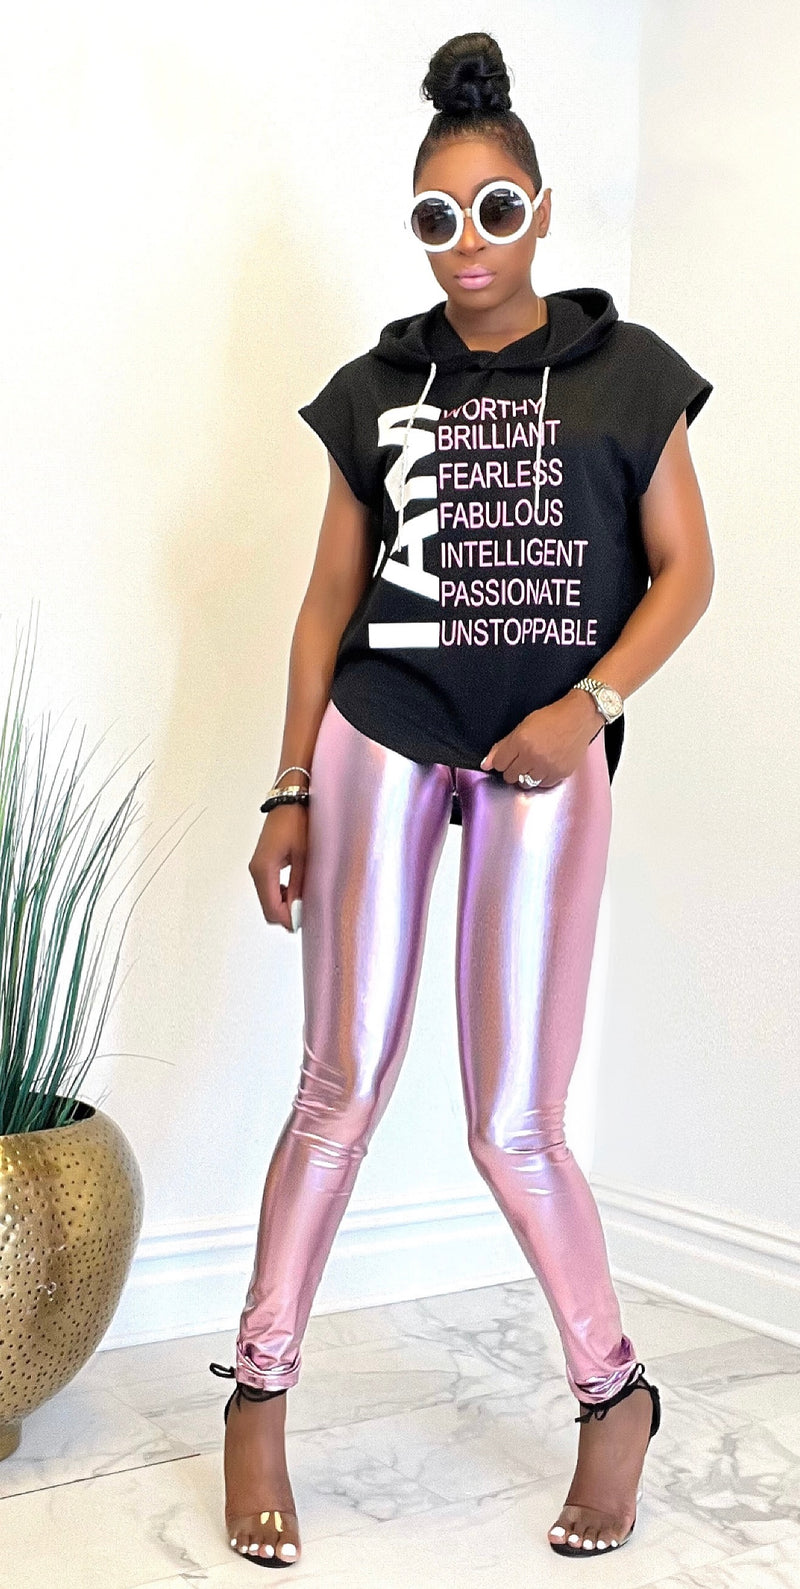 Girls Wet Look Outfit Crop Top and Leggings New Metallic Black Shiny  Stretch Set | eBay